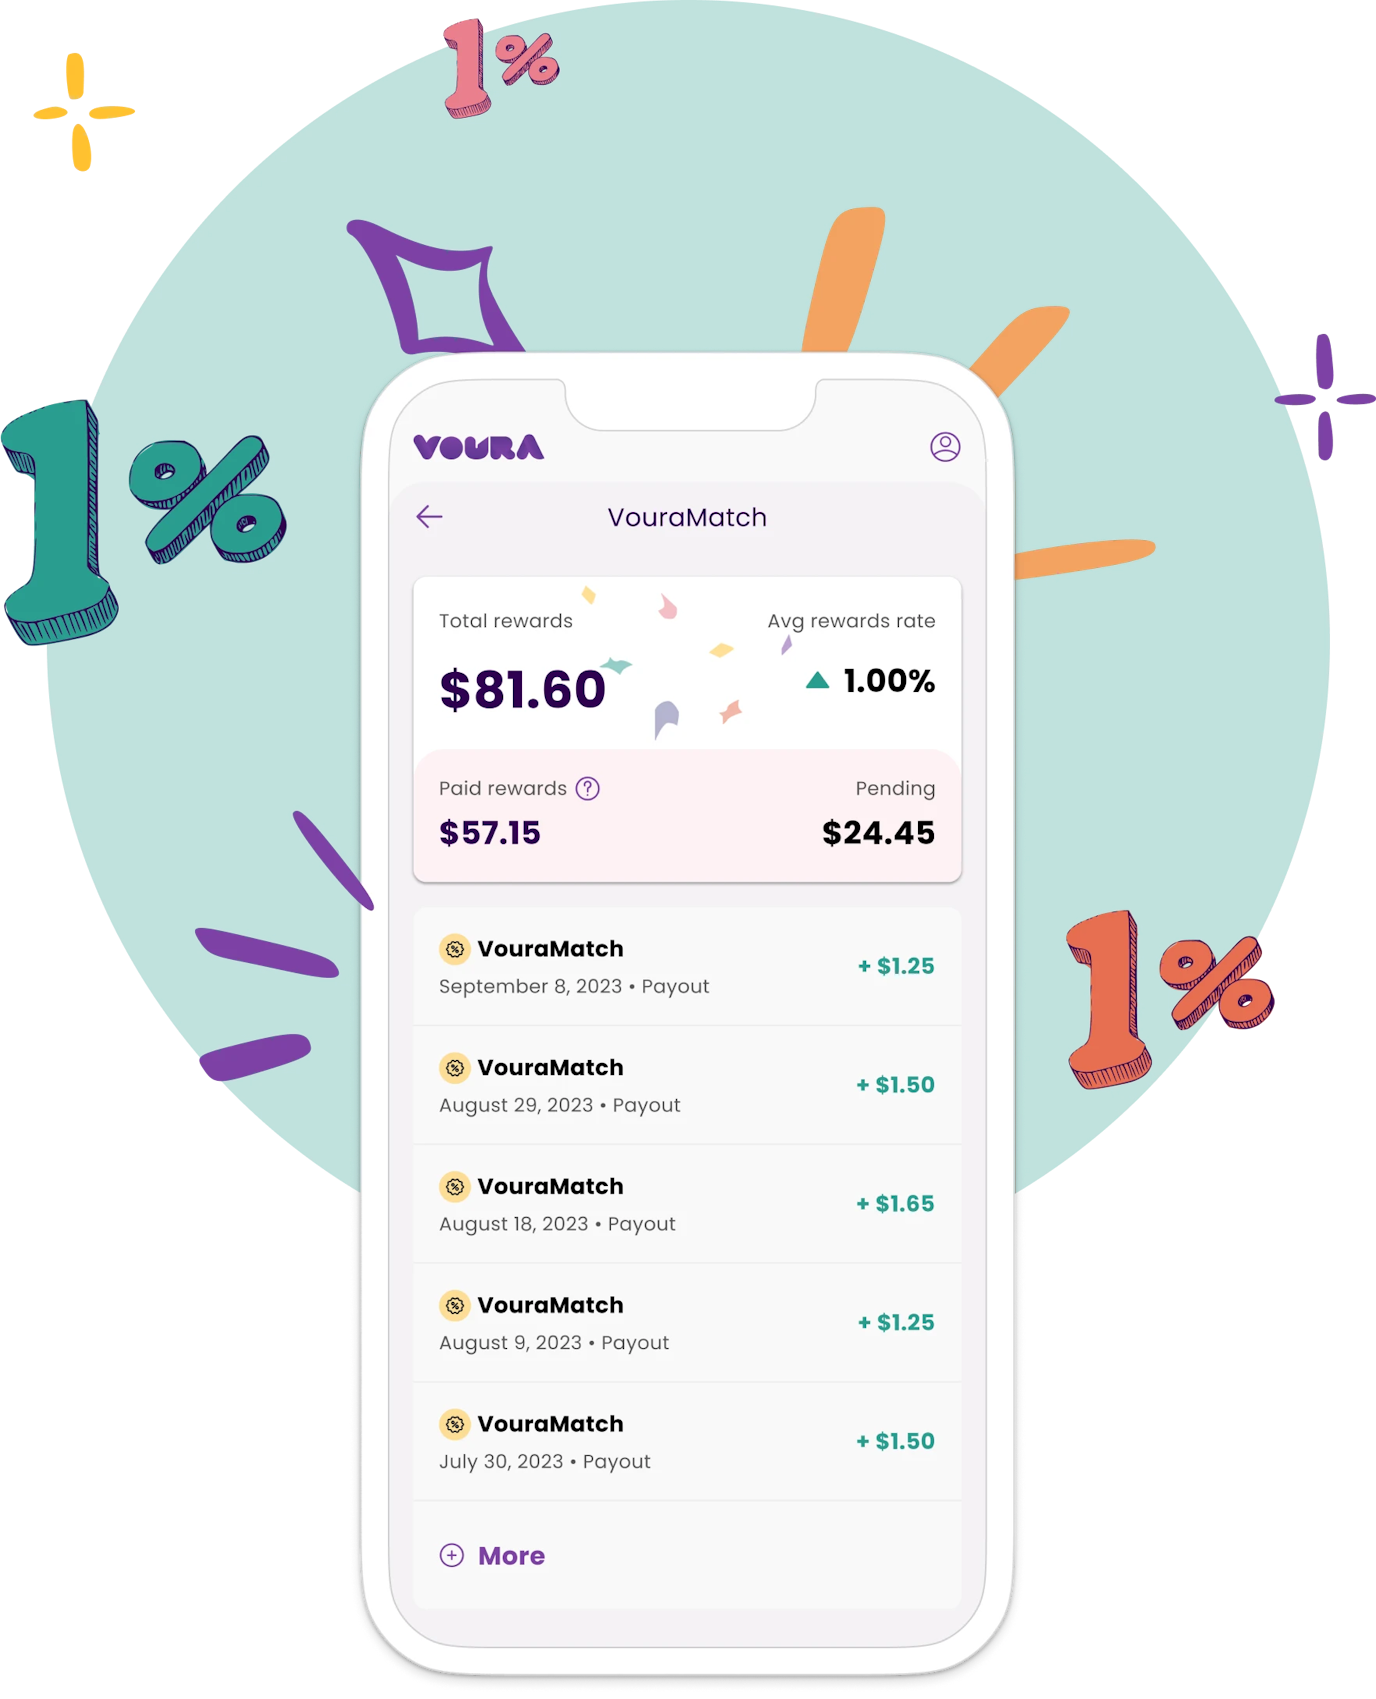 Mobile phone with VouraMatch rewards app screen, showing overview with total rewards balance of $81.60, average rewards rate of 1.00%, paid rewards of $57.15, and pending rewards of $24.45, followed by a list of transactions showing the VouraMatch payouts.